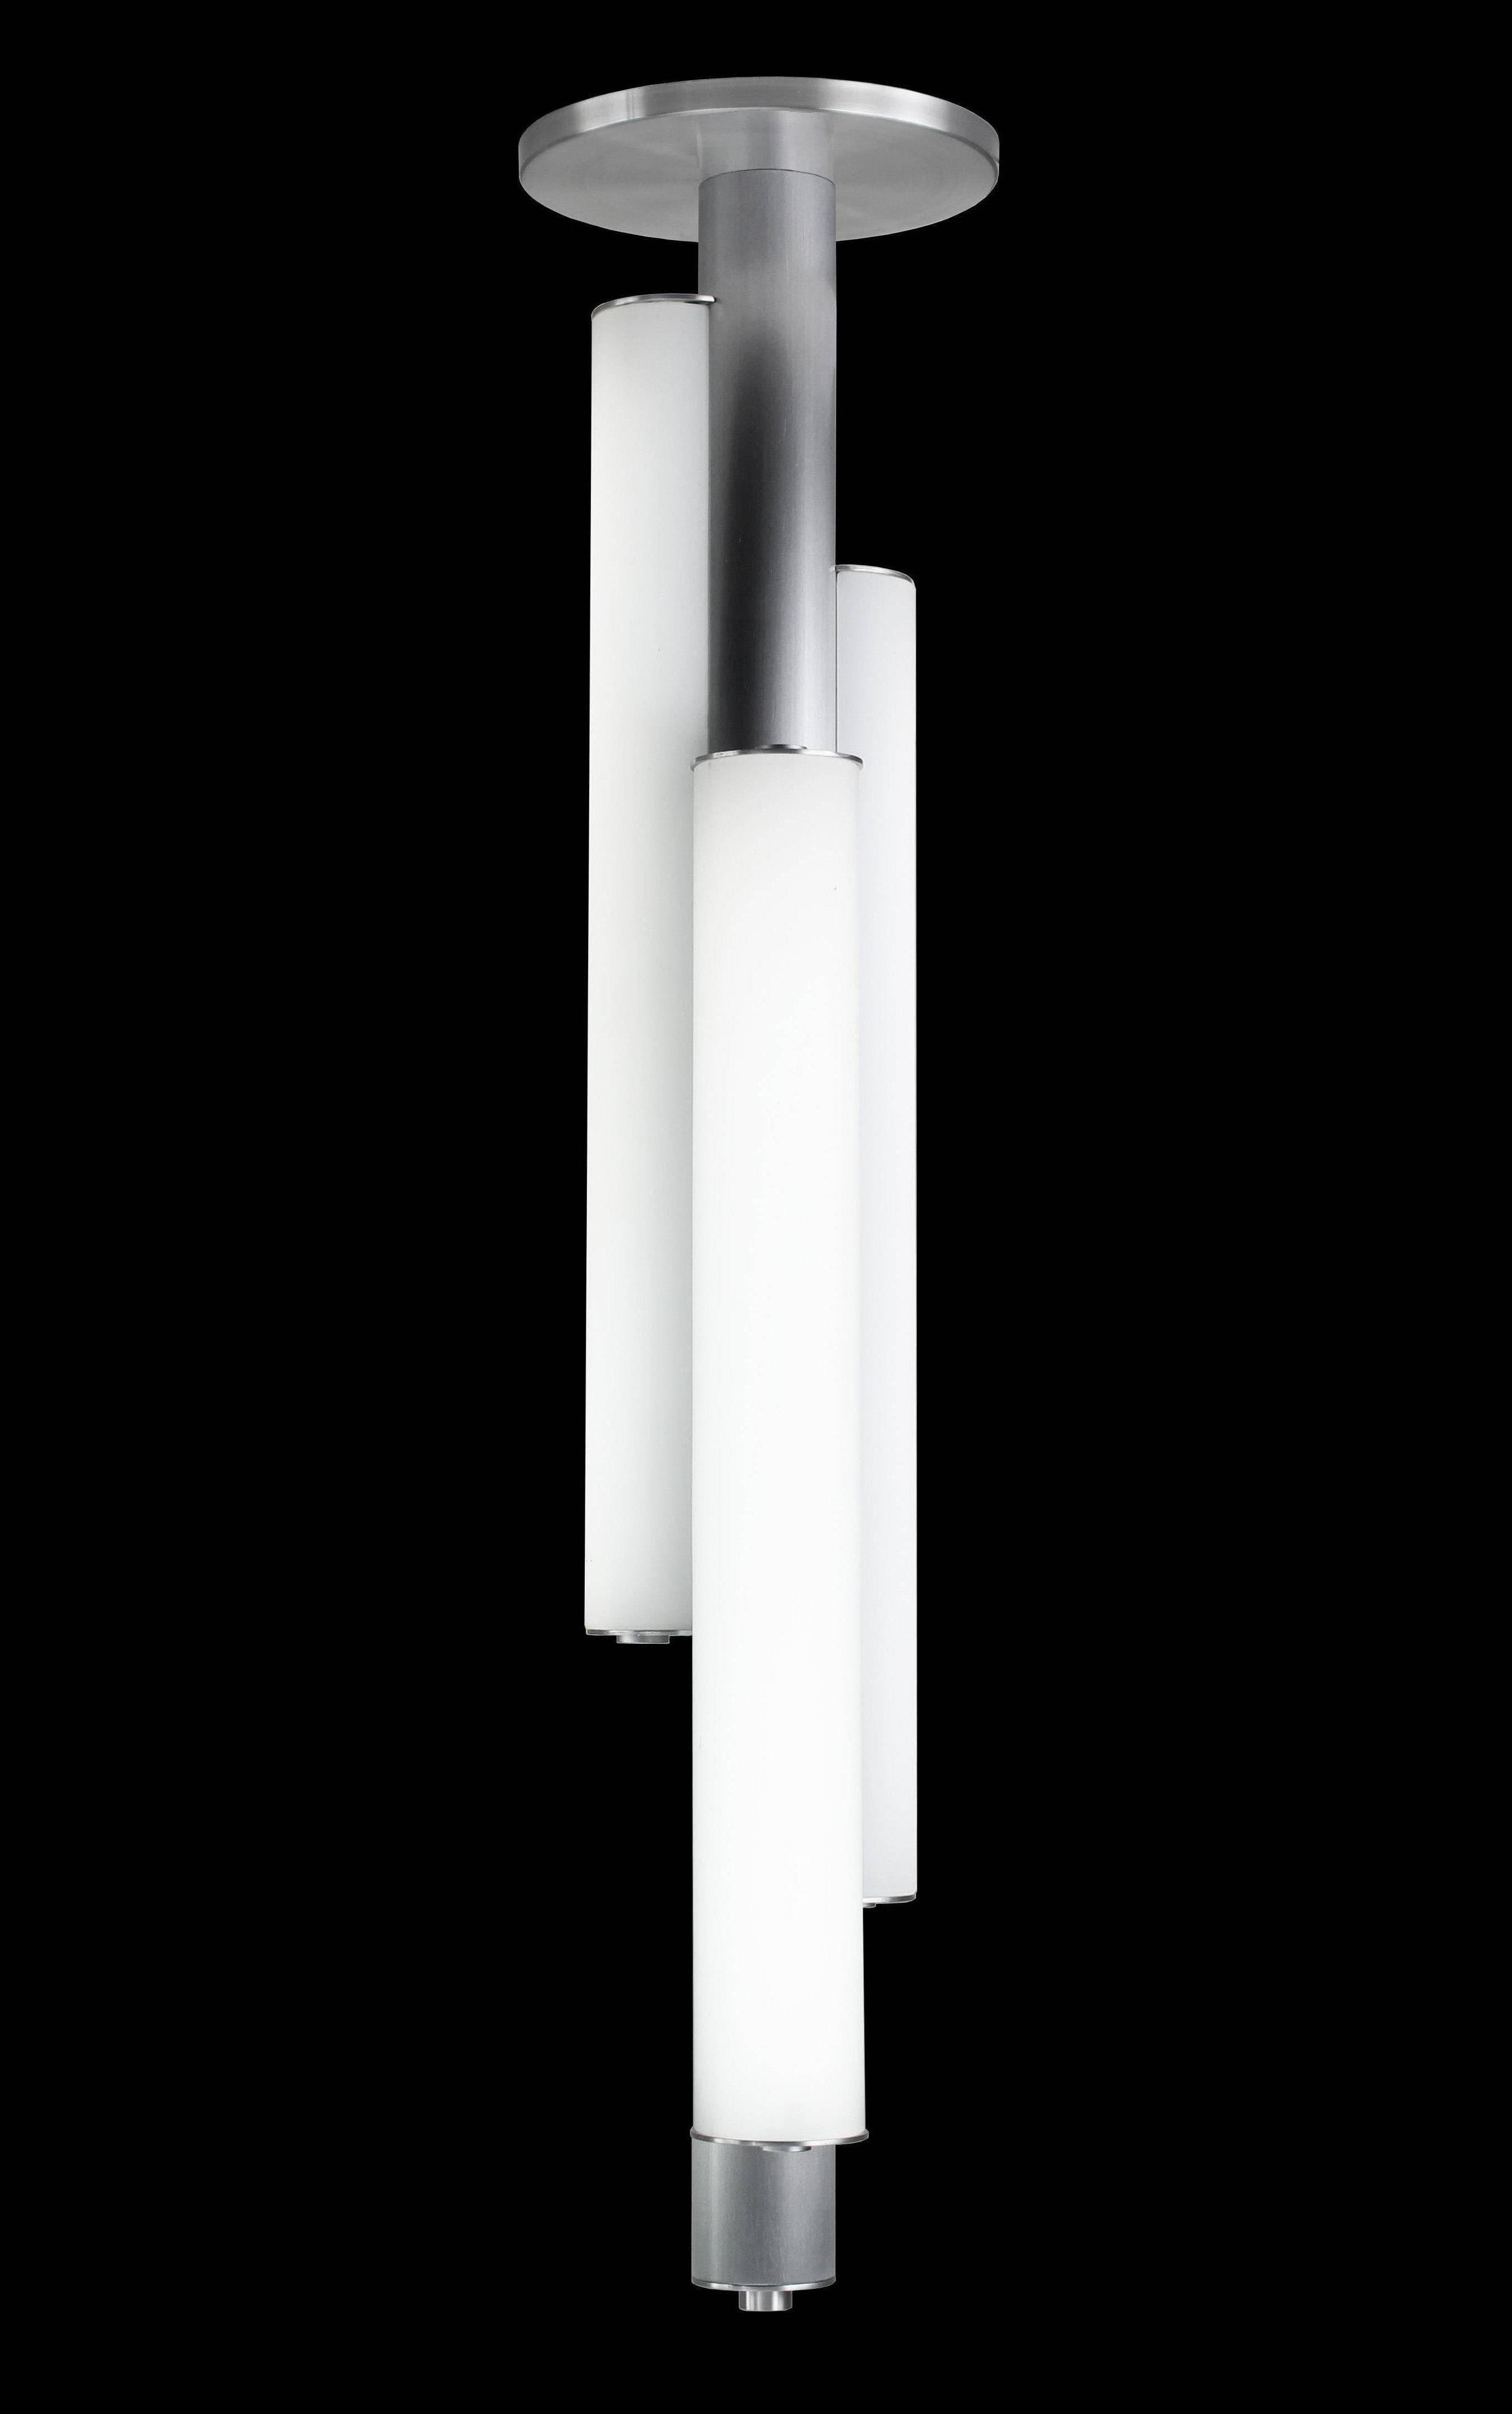 In the manner of Art Deco. Triple white glass cylinder ceiling pendant light. Aluminium centre tube supports three glass cylinders with rhythmic height differences. LED 3000K standard color temperature.

Architect, Sandy Littman of Duesenberg LTD. 